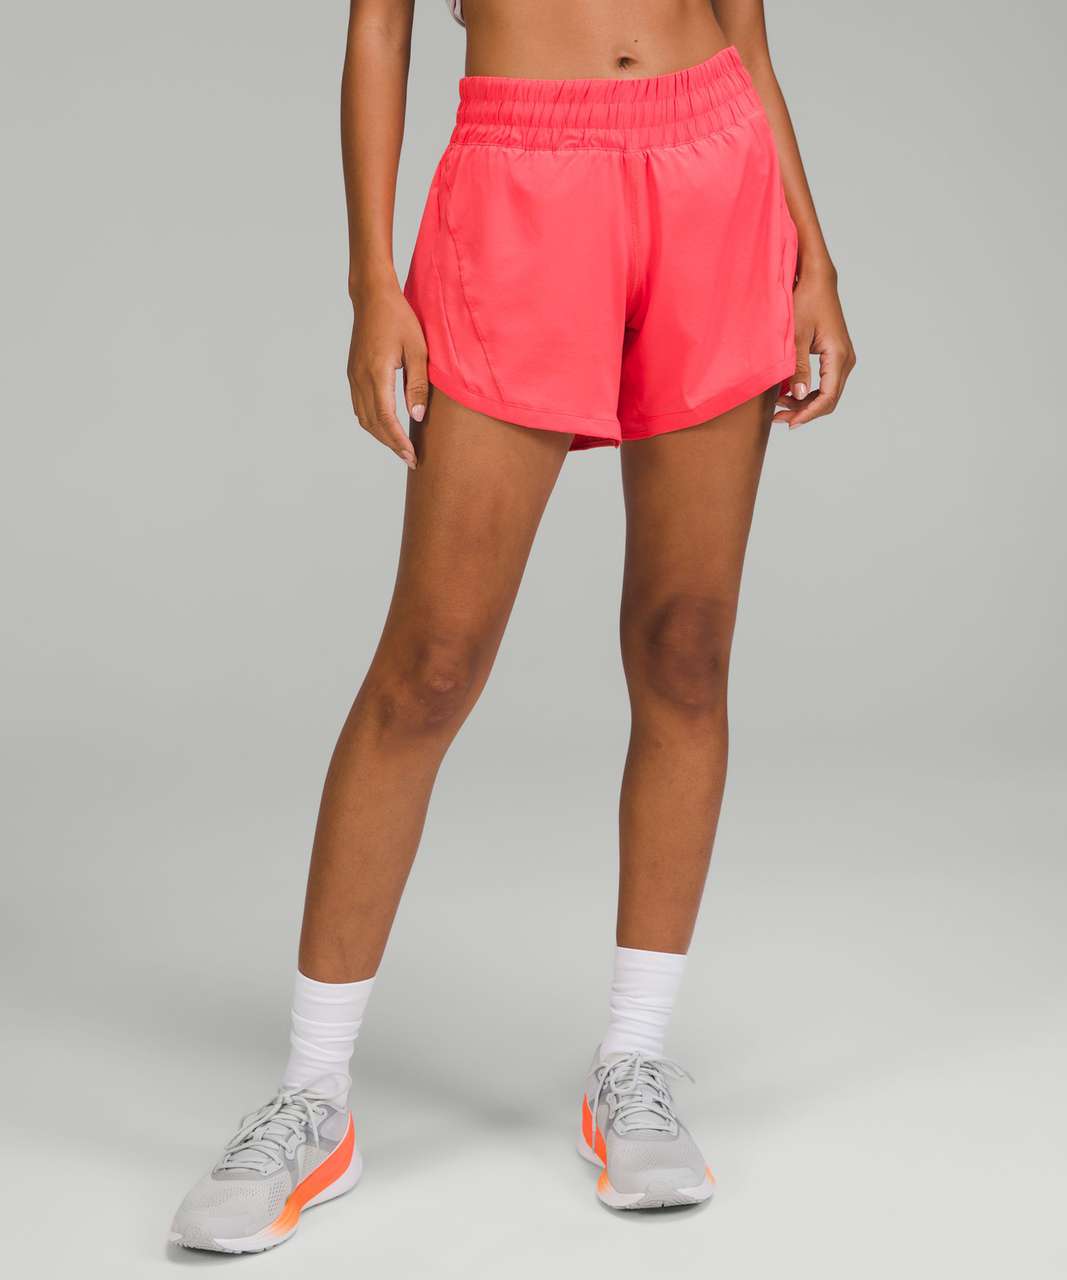 Lululemon Track That Mid-Rise Lined Short 5" - Pale Raspberry